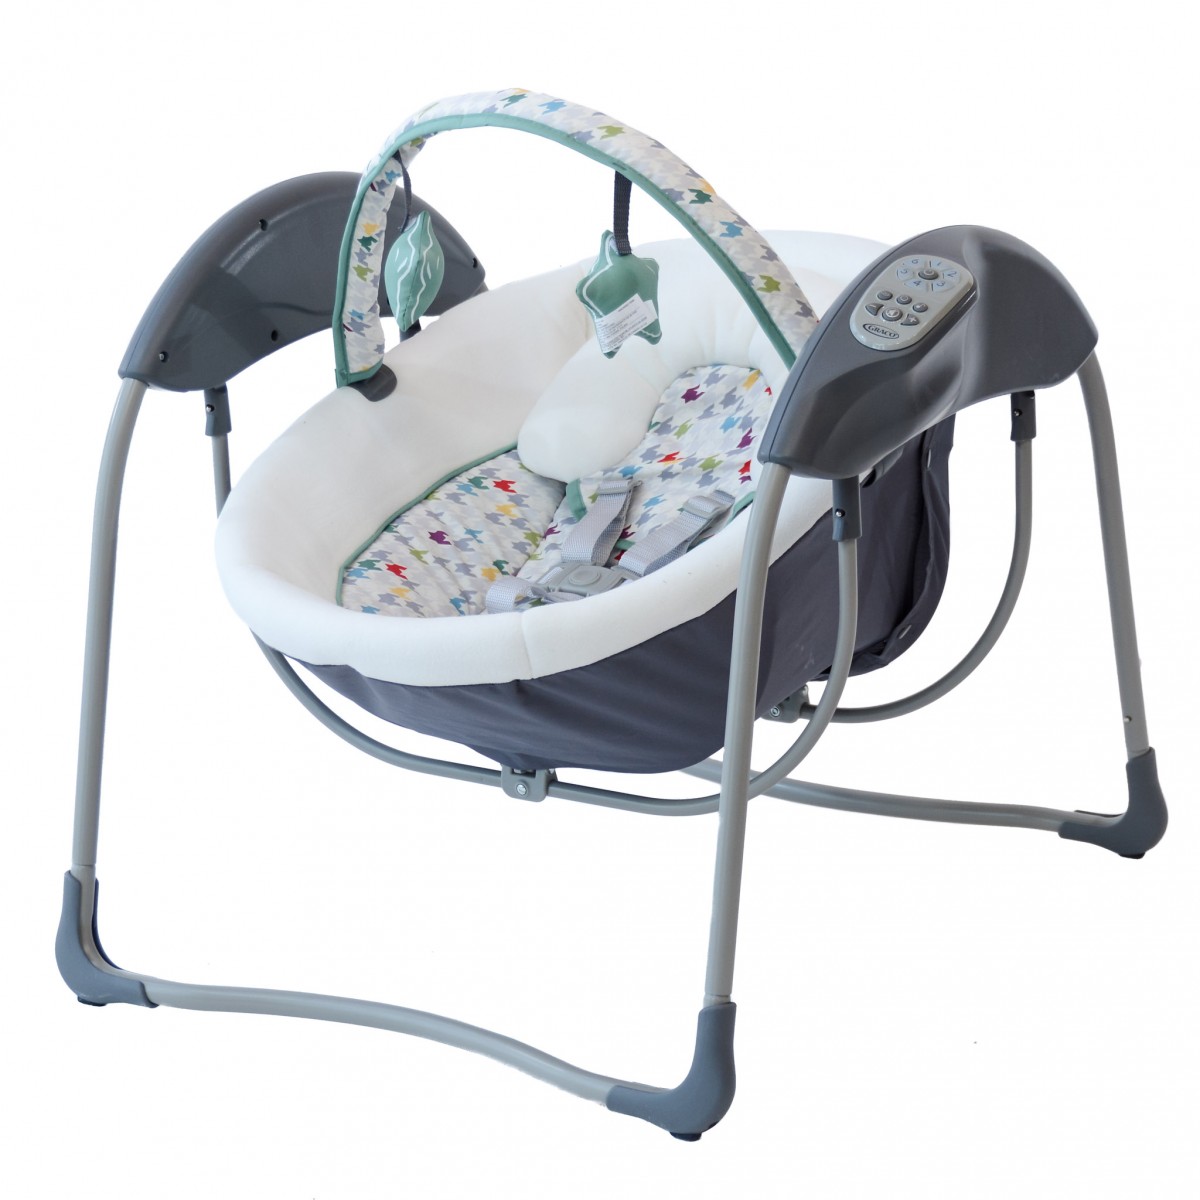 graco glider lite lx baby swing review